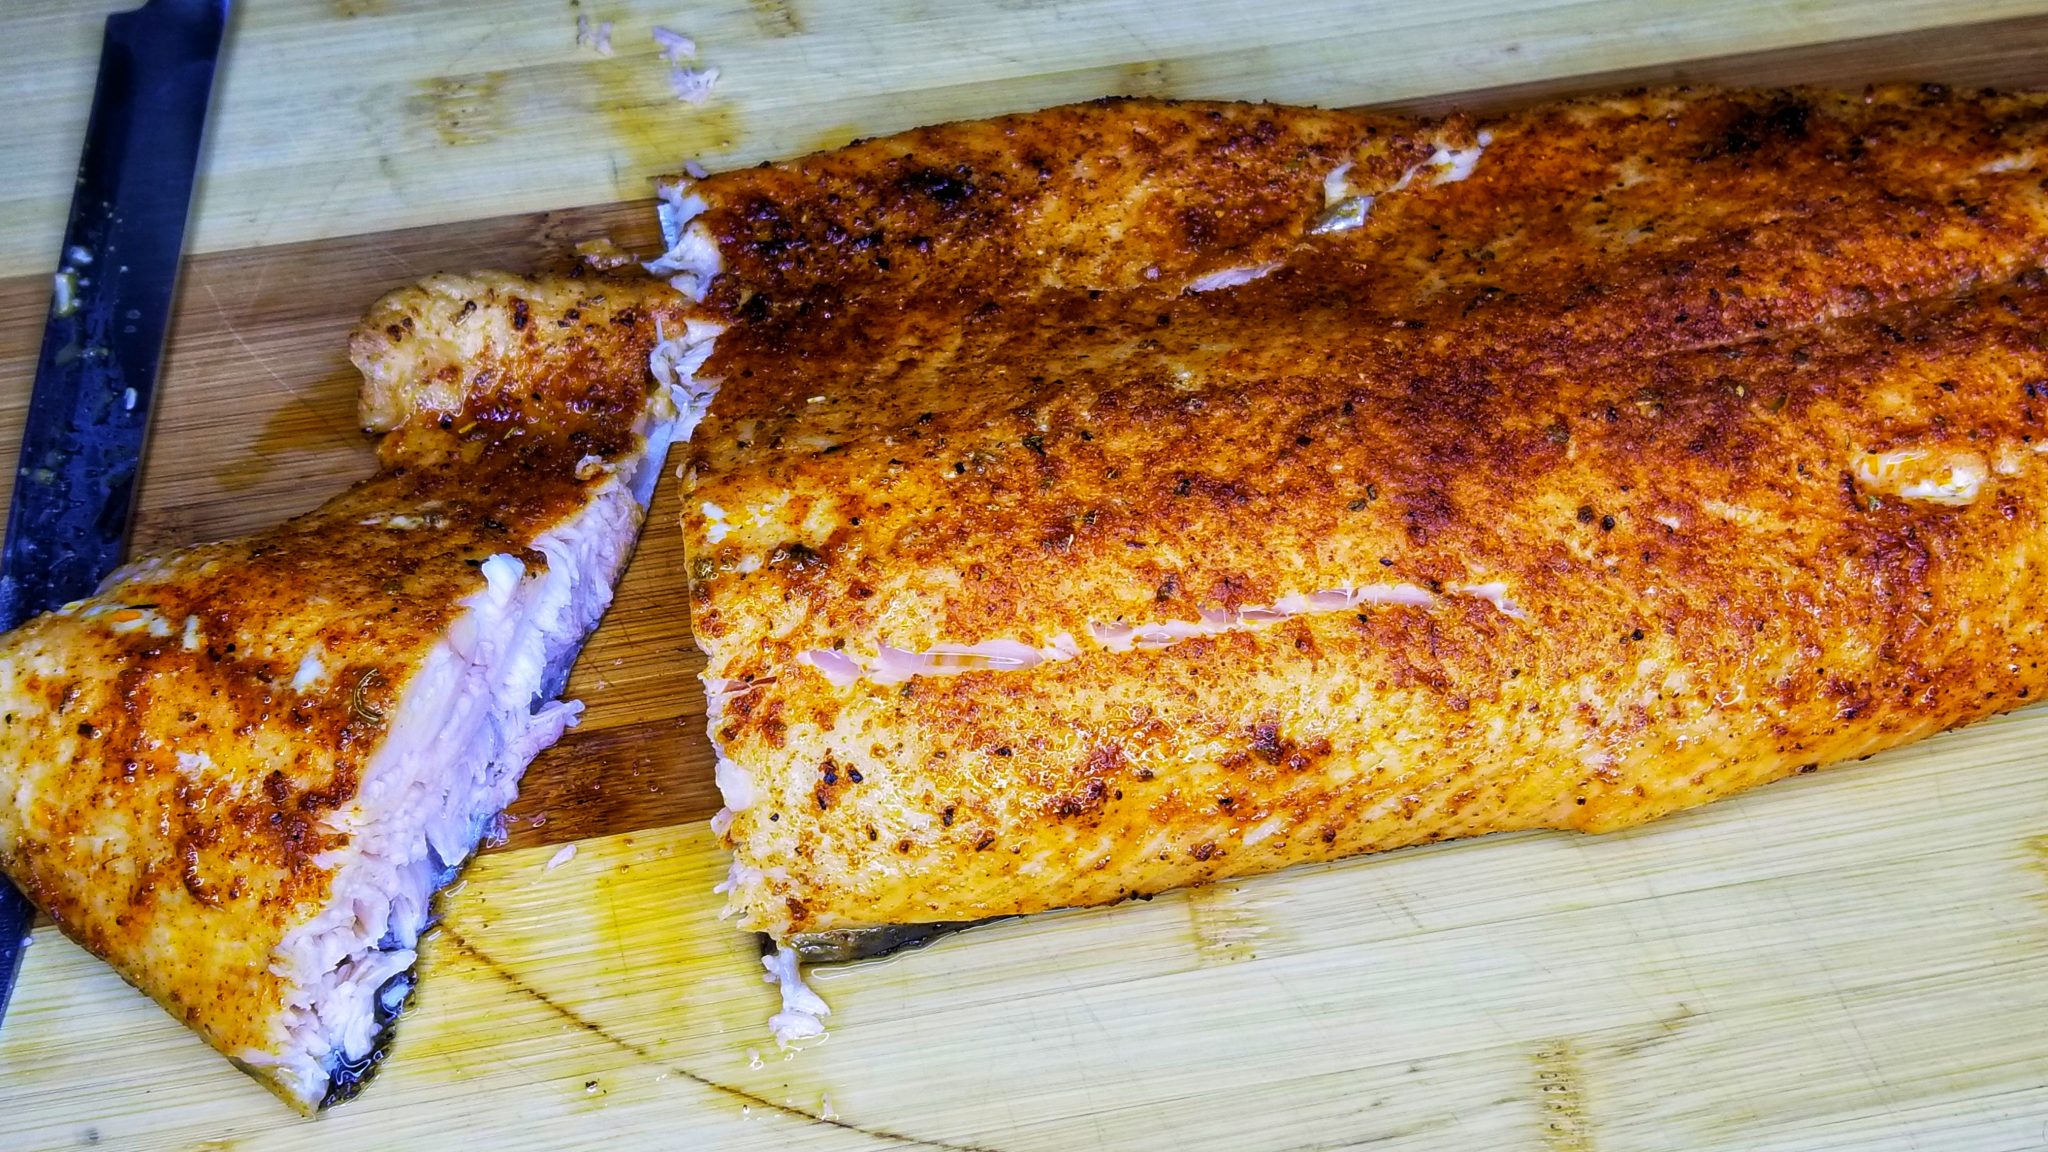 How to cook salmon patties oven roasted salmon how to cook salmon in the oven sweet savant America's best food blog